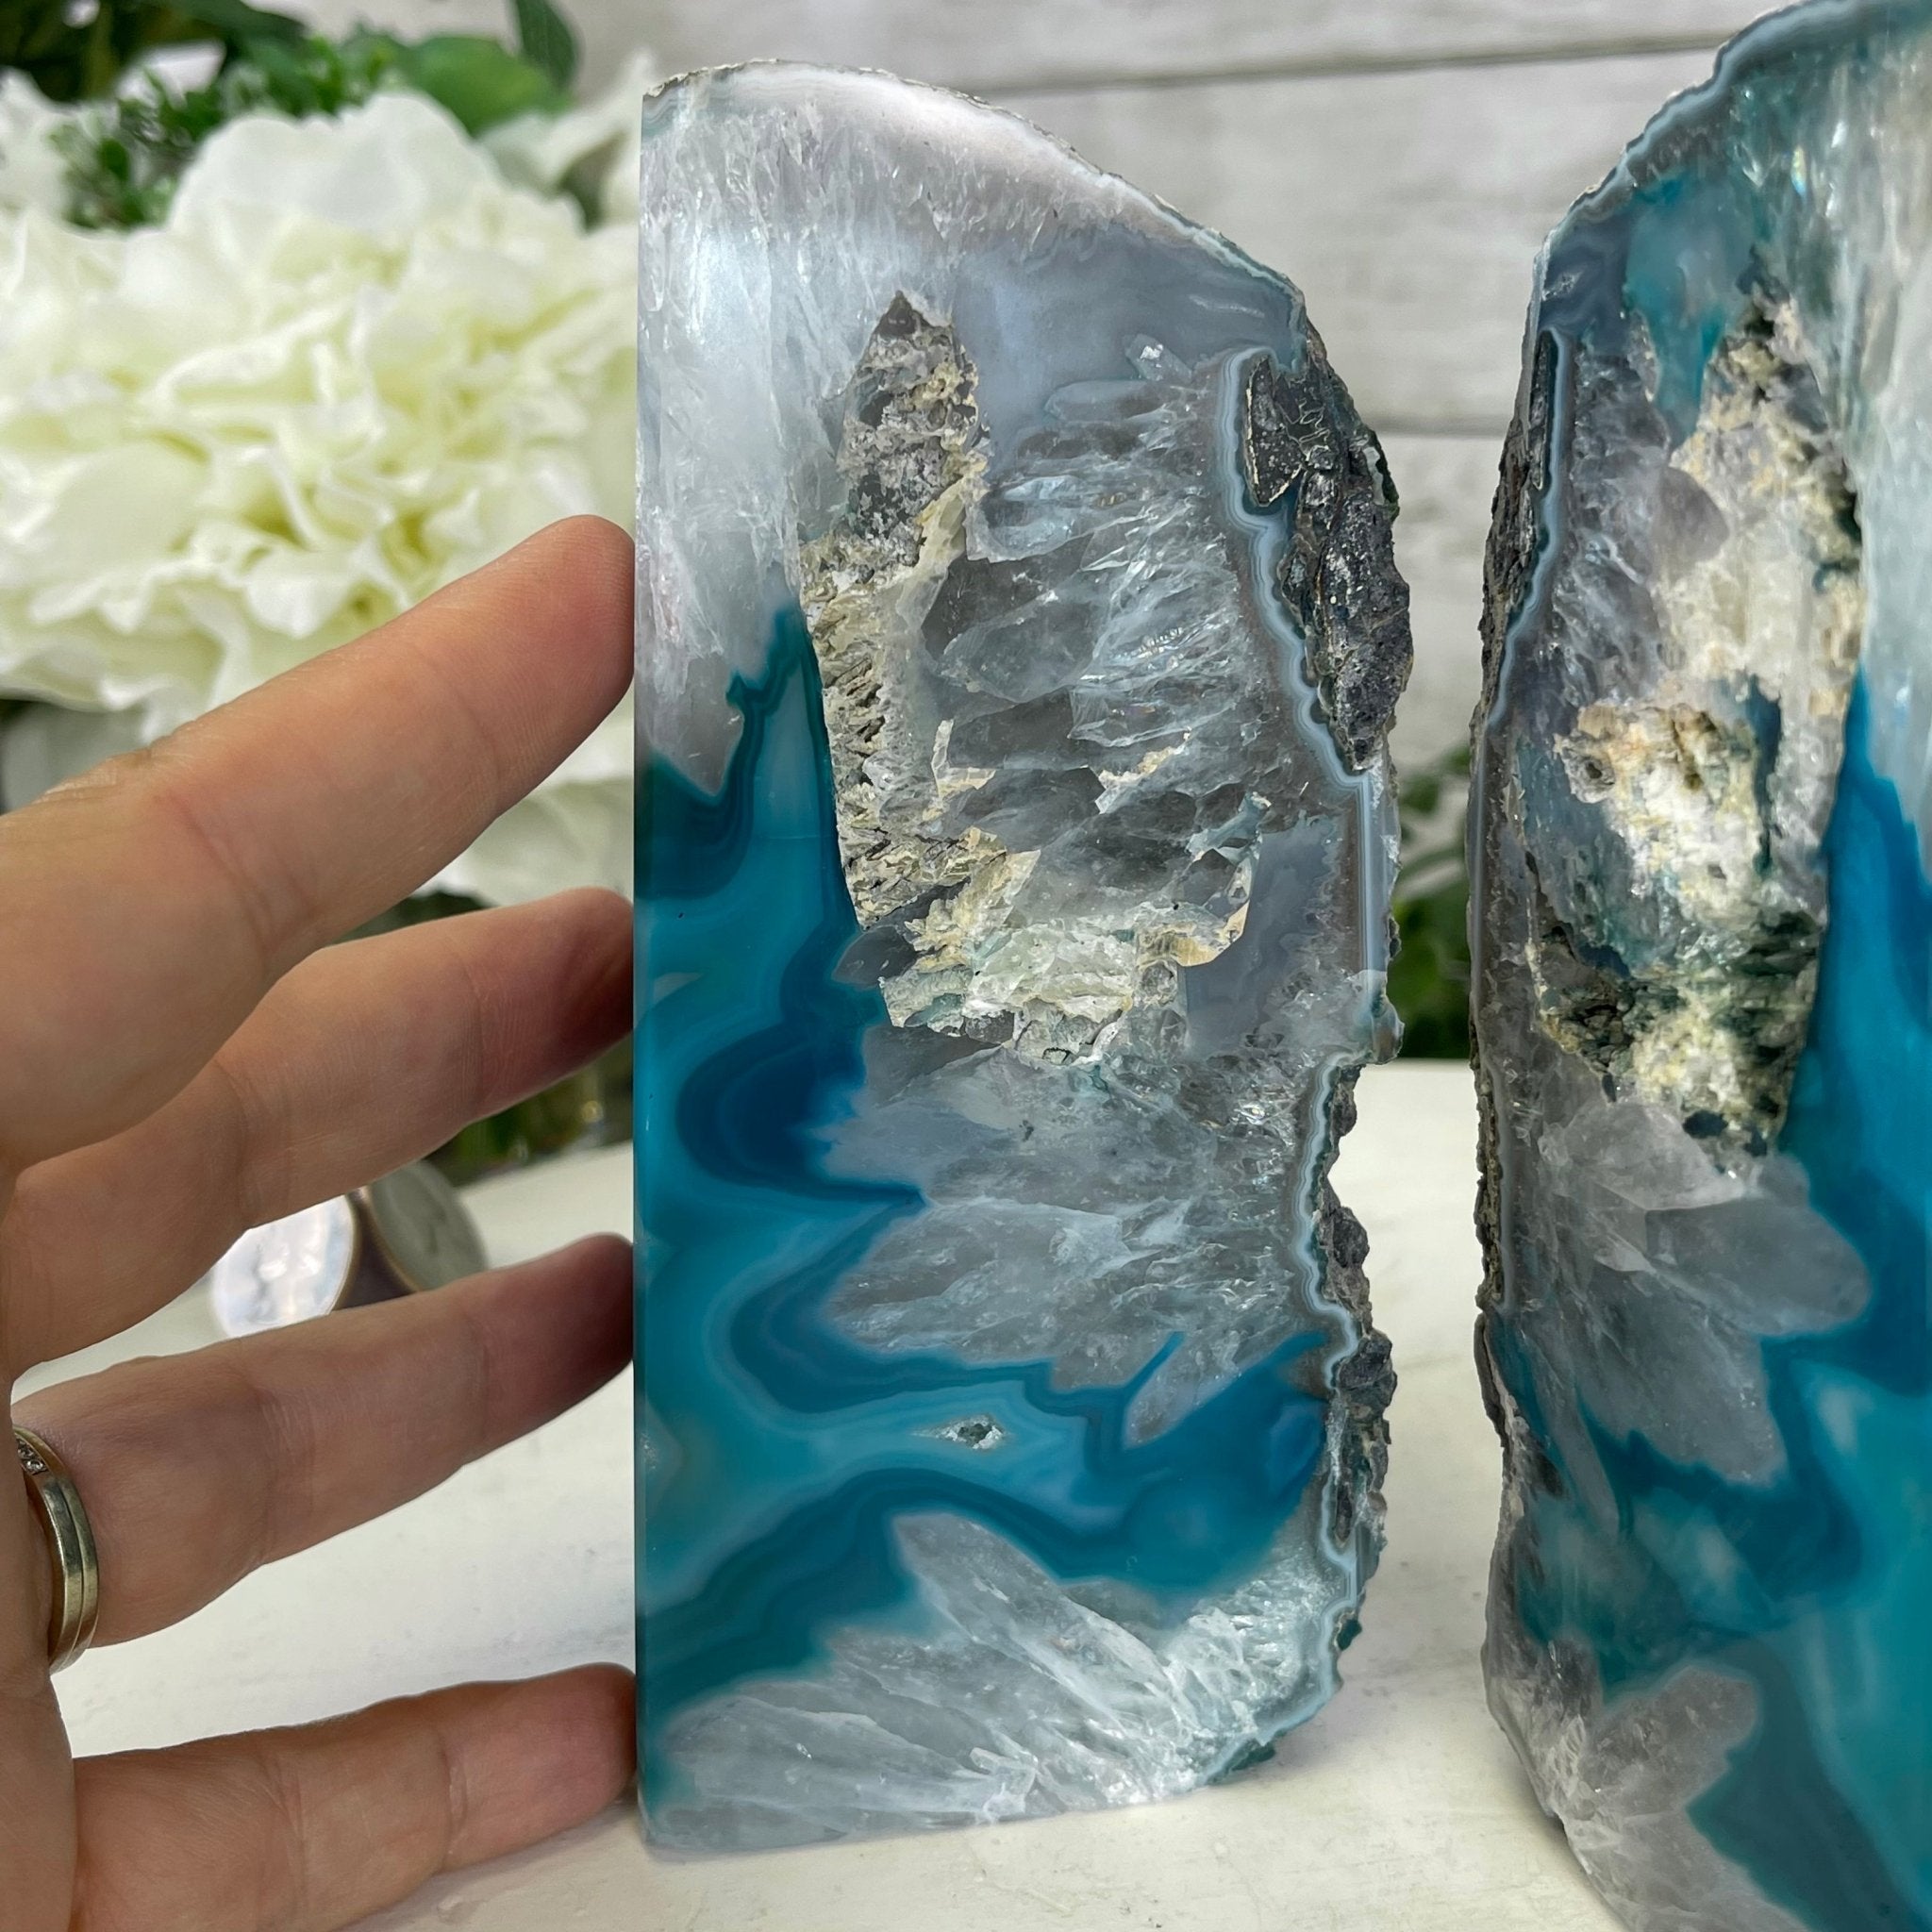 Teal Dyed Brazilian Agate Stone Bookends, 9.3 lbs & 5.75" tall Model #5151TL-020 by Brazil Gems - Brazil GemsBrazil GemsTeal Dyed Brazilian Agate Stone Bookends, 9.3 lbs & 5.75" tall Model #5151TL-020 by Brazil GemsBookends5151TL-020